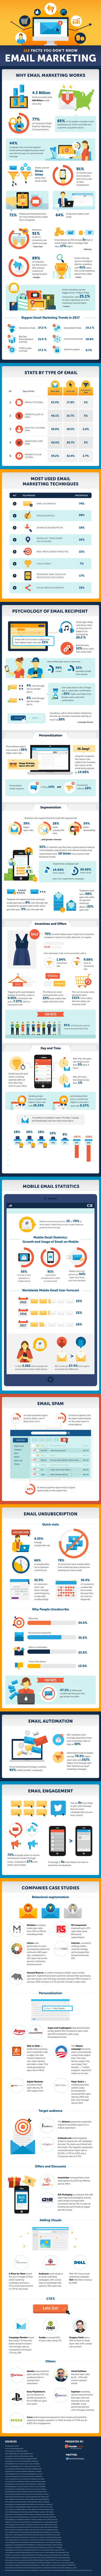 Email Marketing Stats Infographic